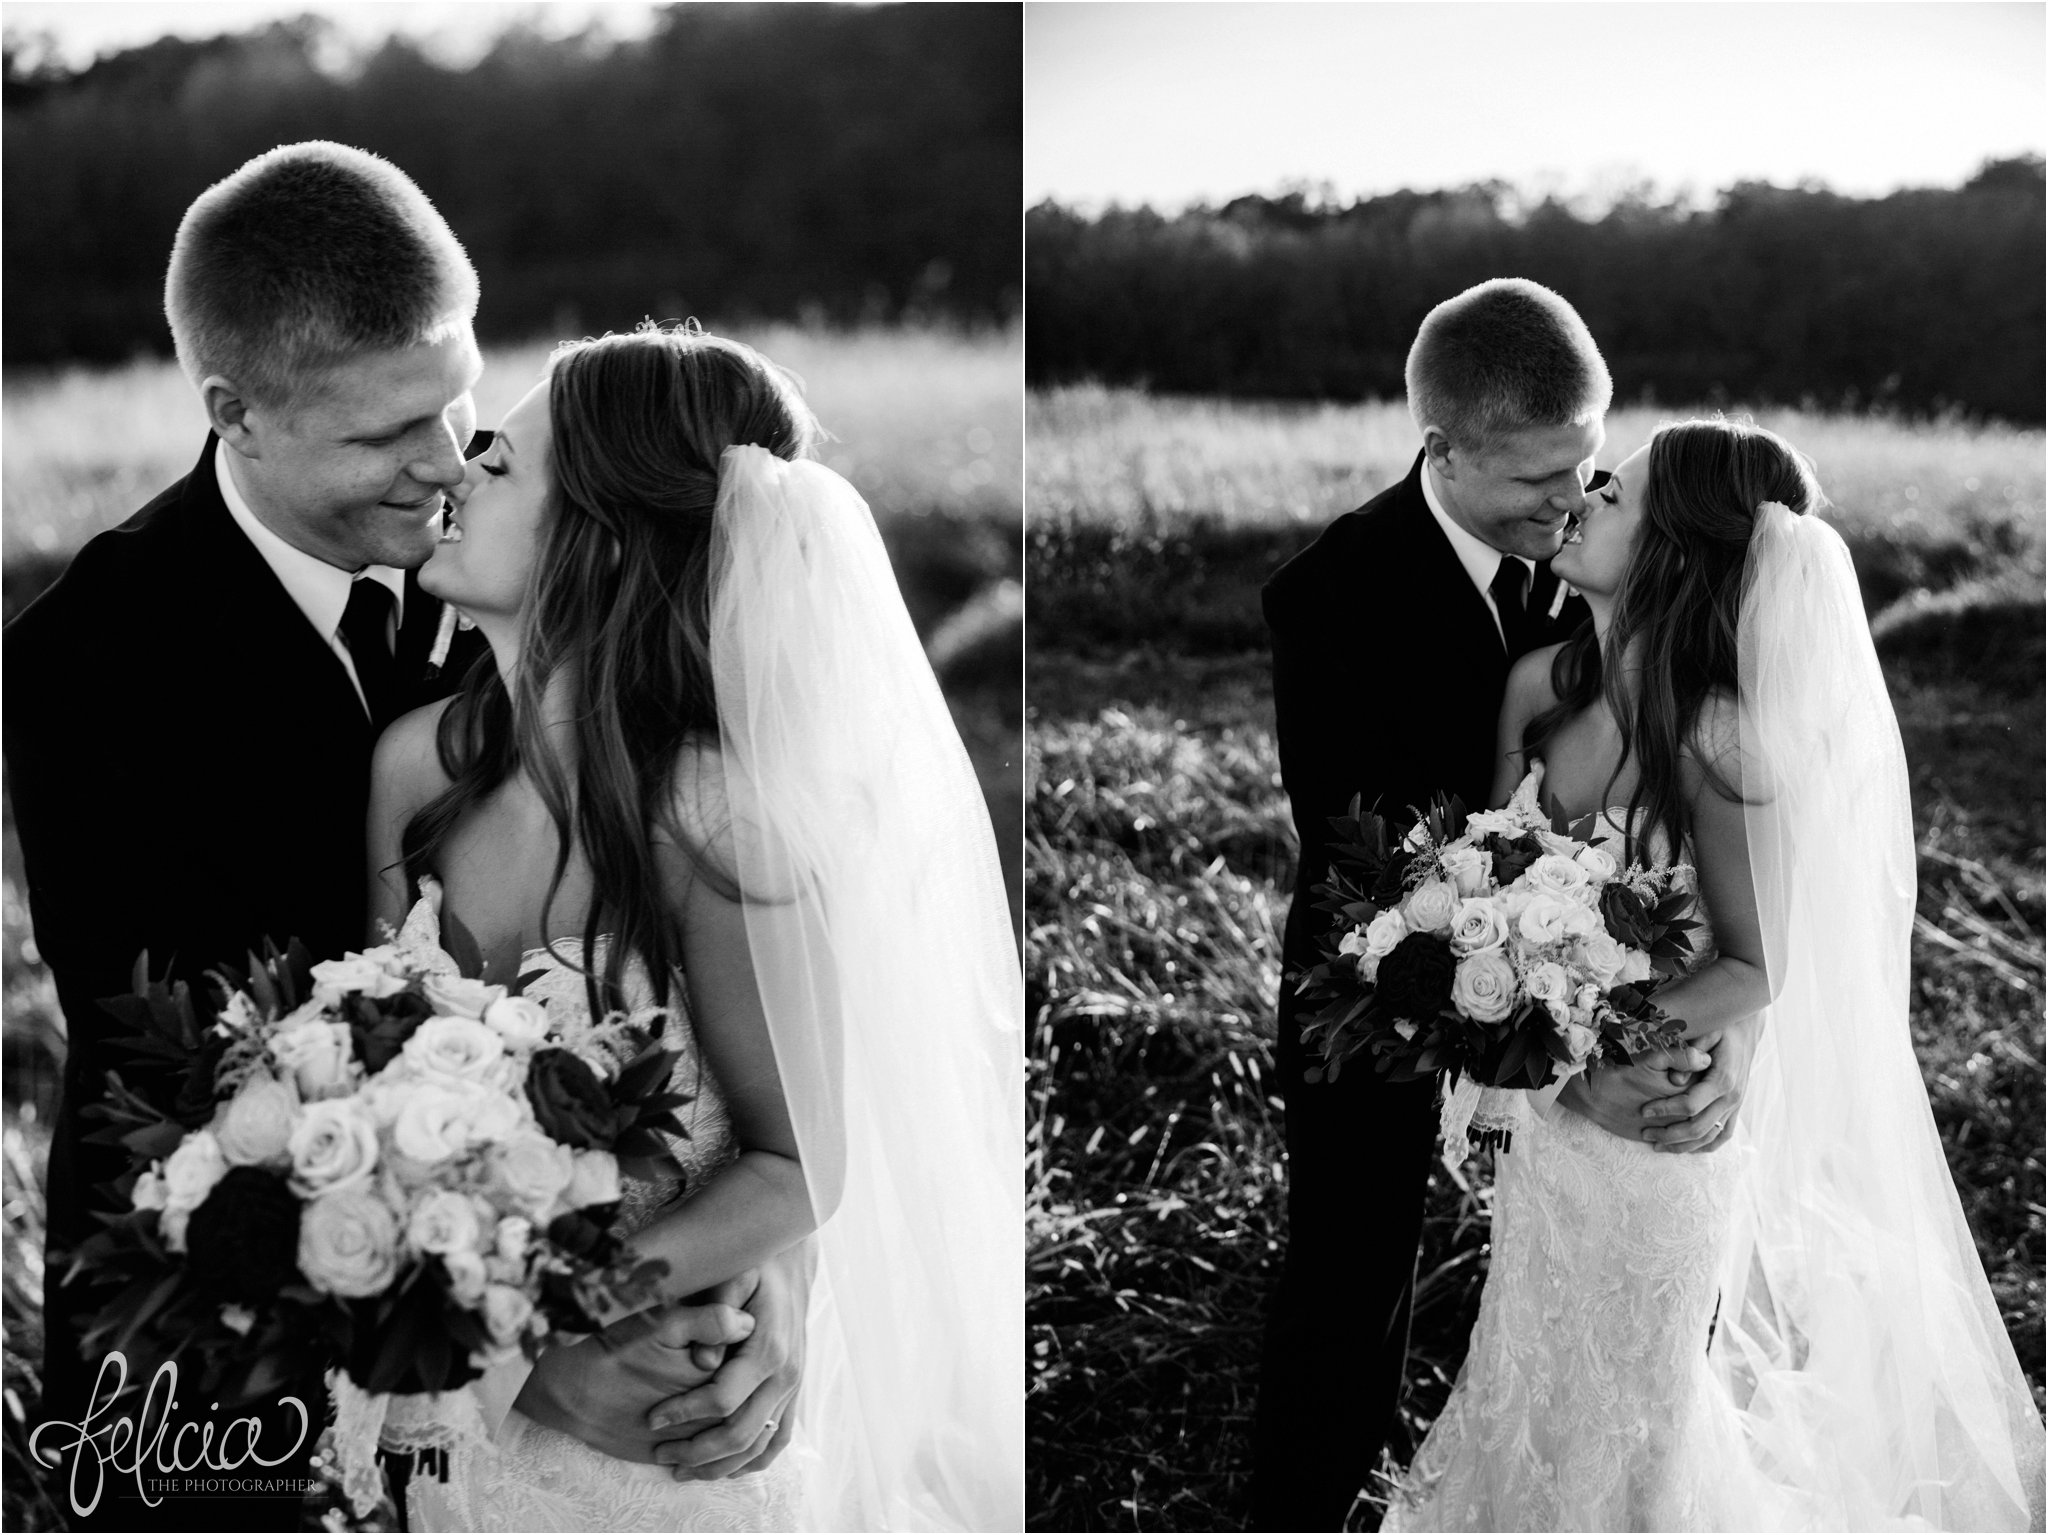 black and white | wedding | wedding photos | Rumely Event Space | wedding photography | images by feliciathephotographer.com | field background | nature | bride and groom portraits | sunlight | smiling bride | candid | Wild Hill Flowers | kissing in field | kiss | smiling kiss 